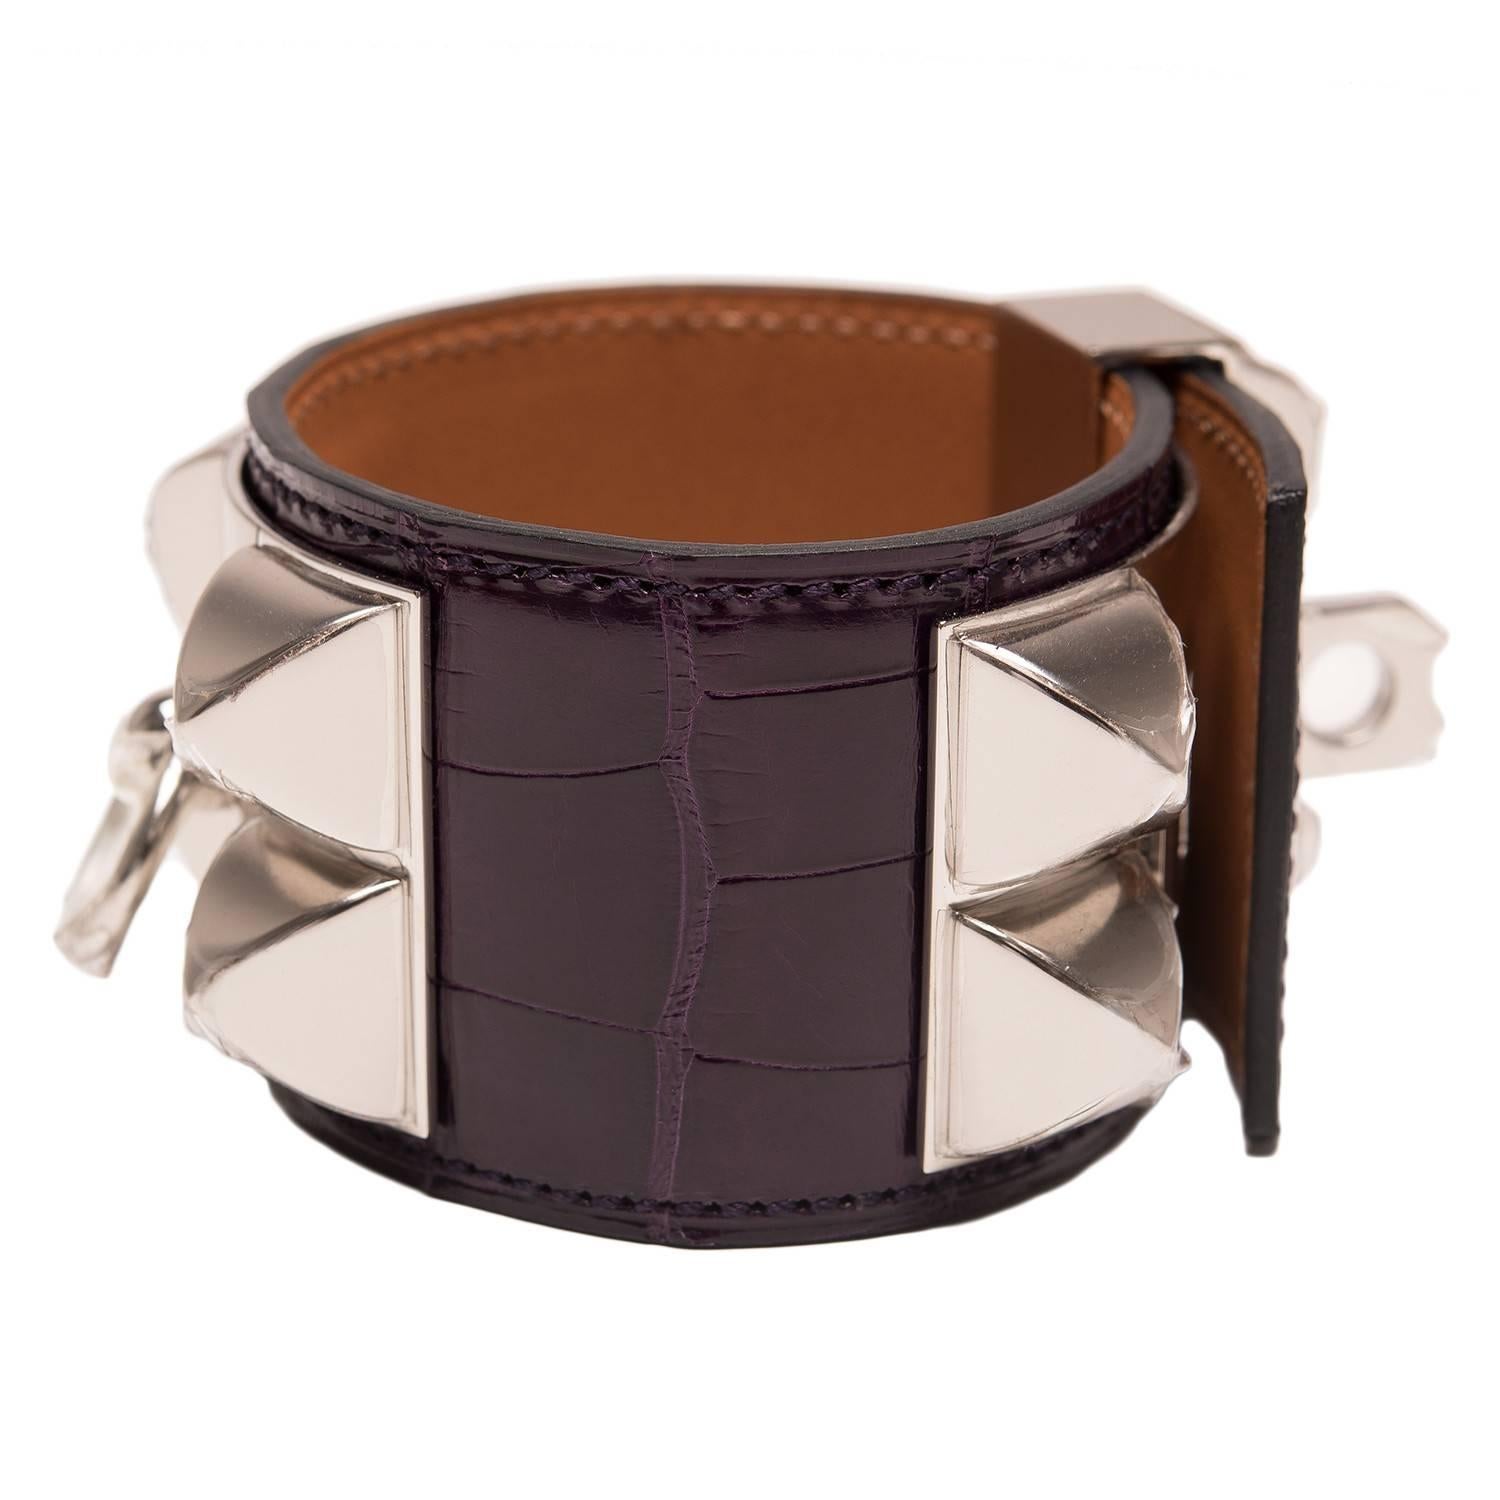 Hermes Collier de Chien (CDC) in Violet alligator with palladium plated hardware in size small.

This style features palladium pyramid studs, center ring and adjustable push lock closure.

Collection: Q square

Origin: France

Condition: